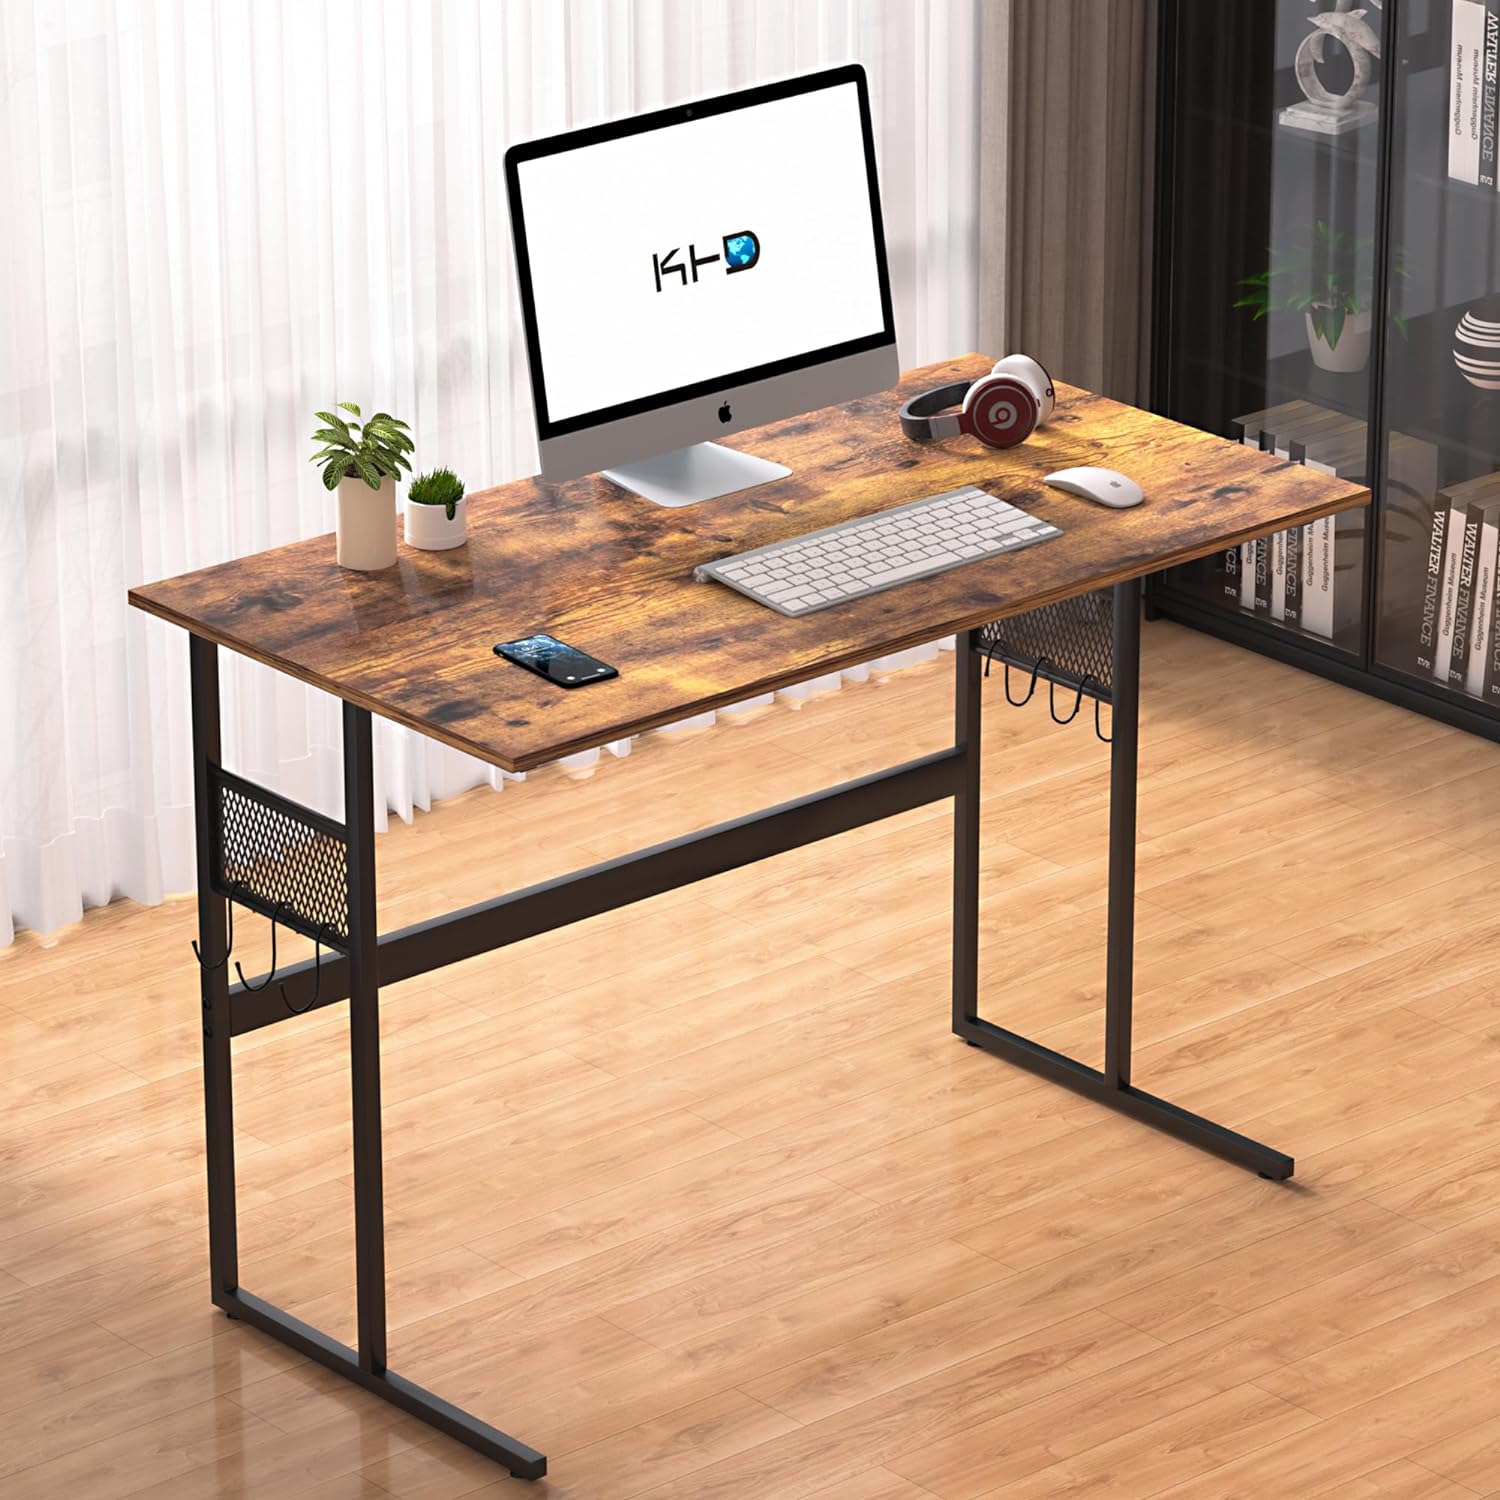 VECELO Computer Desk with Storage Sturdy Laptop No Assembly Required Study Table